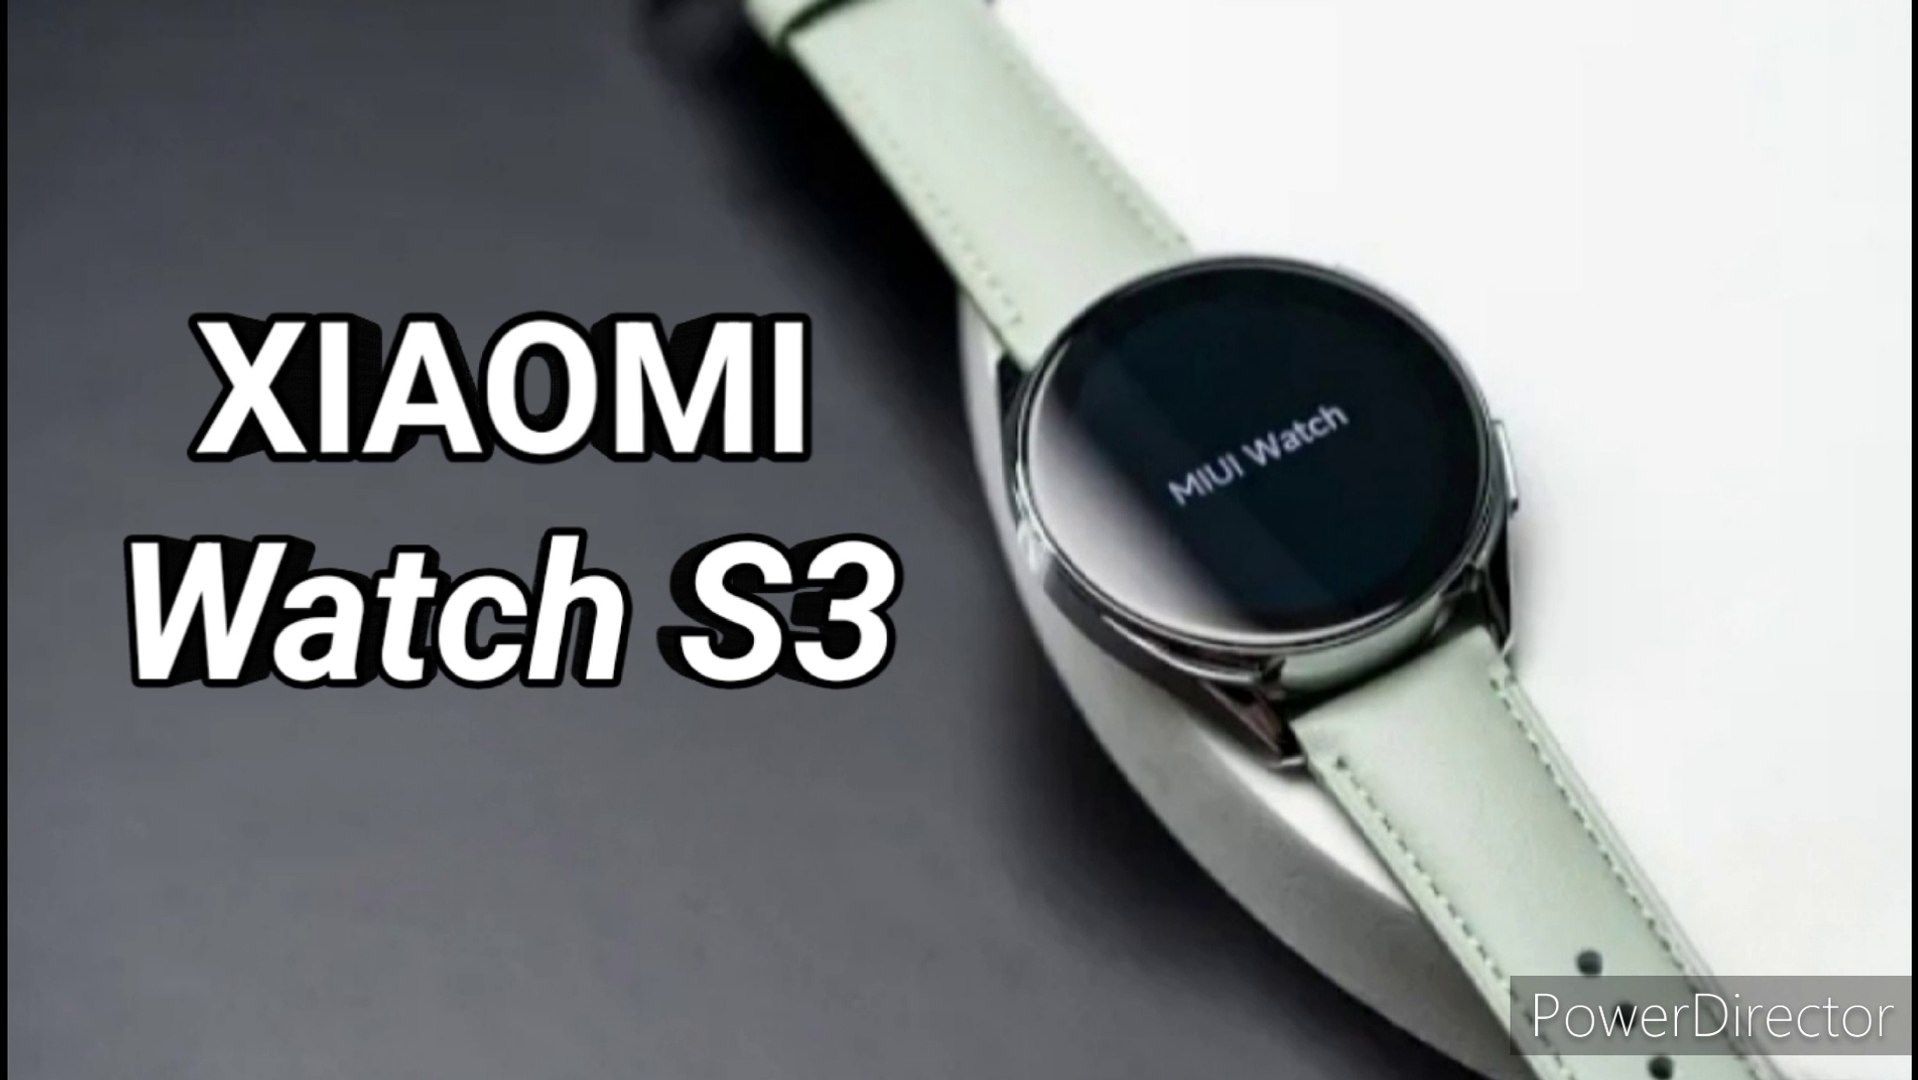 Xiaomi Watch S3 - Key specs surfaced. - video Dailymotion